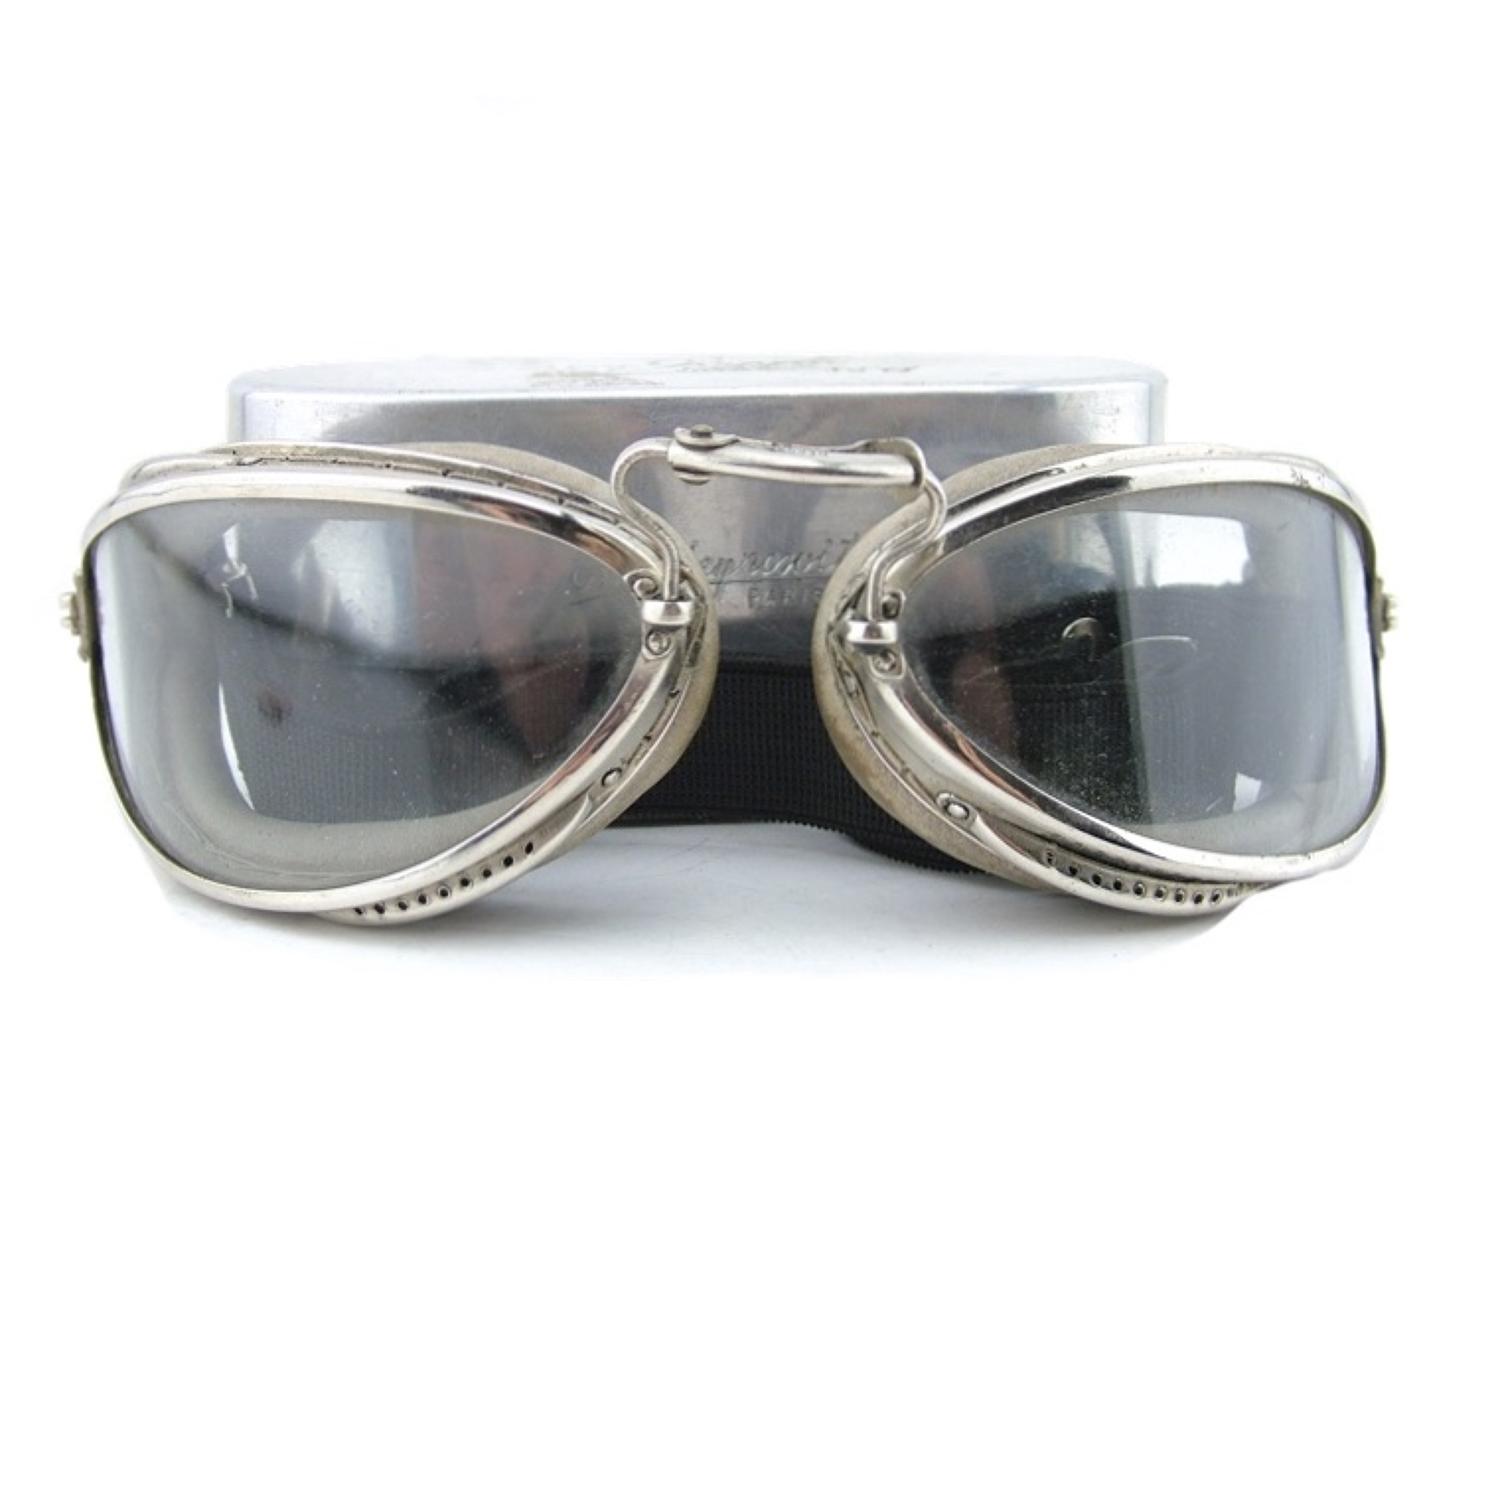 Luxor No.6 flying goggles, cased